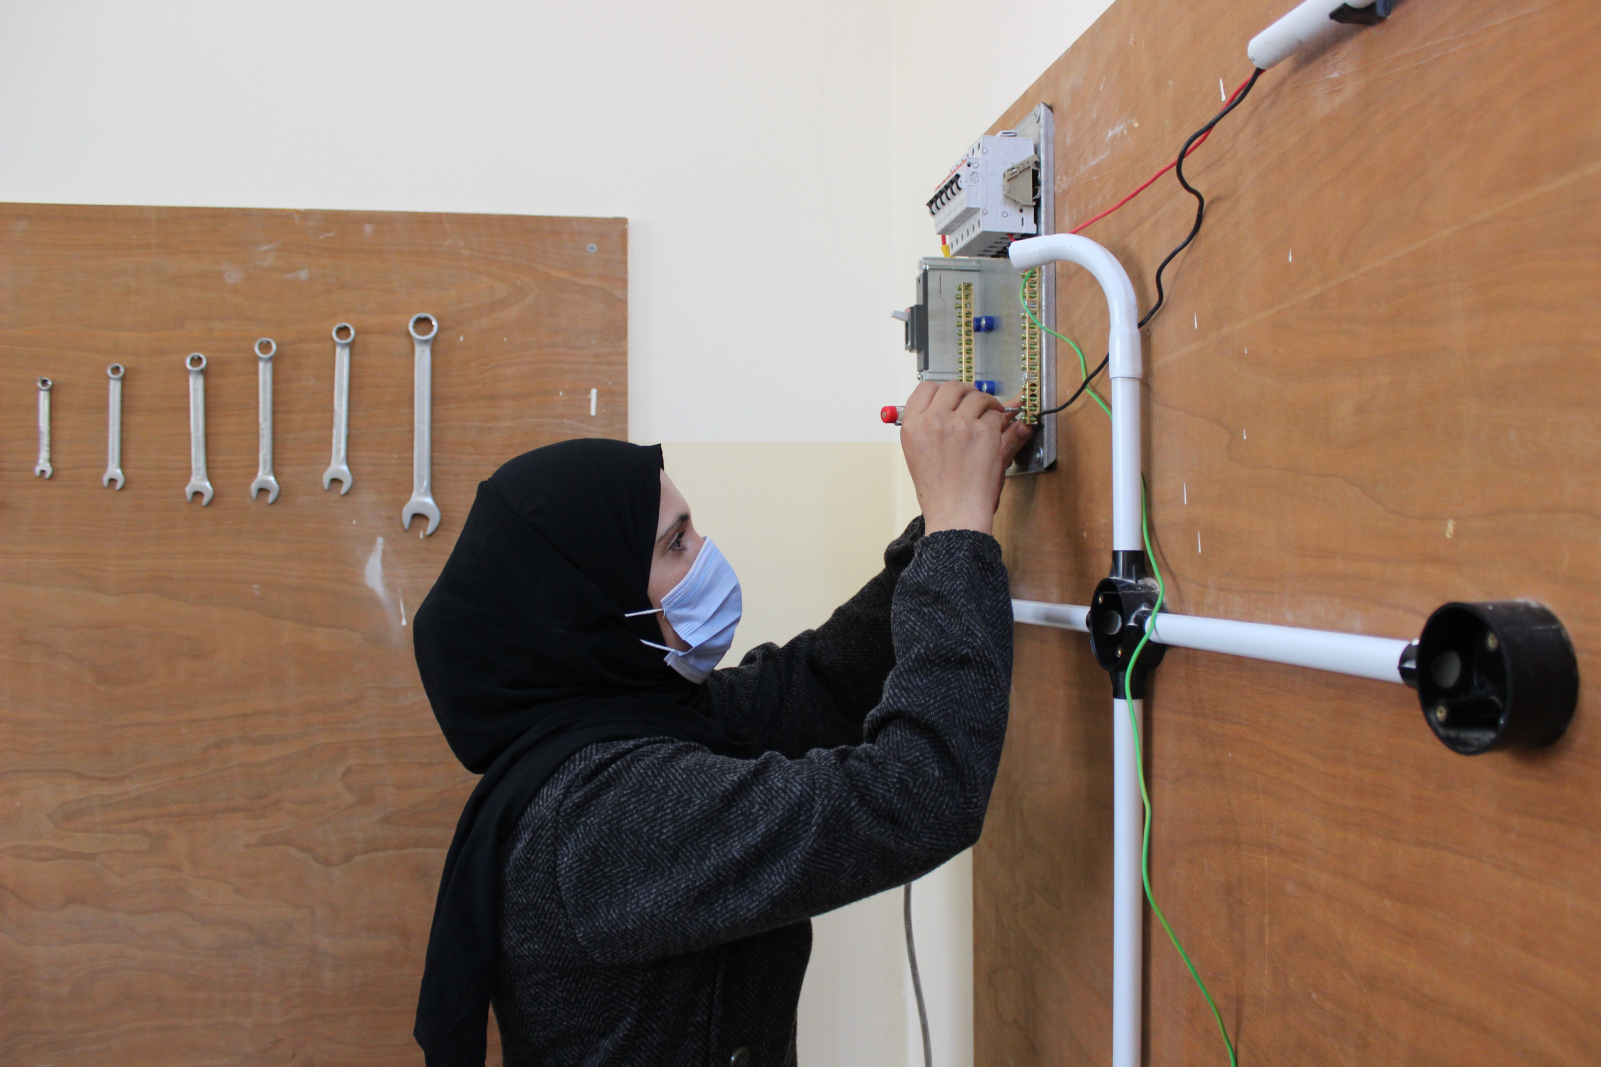 Amal Mohammad Zyoud receives training at the Oasis Centre in Muwaqqar, which is run by the Ministry of Social Development and UN Women. Photo: UN Women/Ye Ji Lee